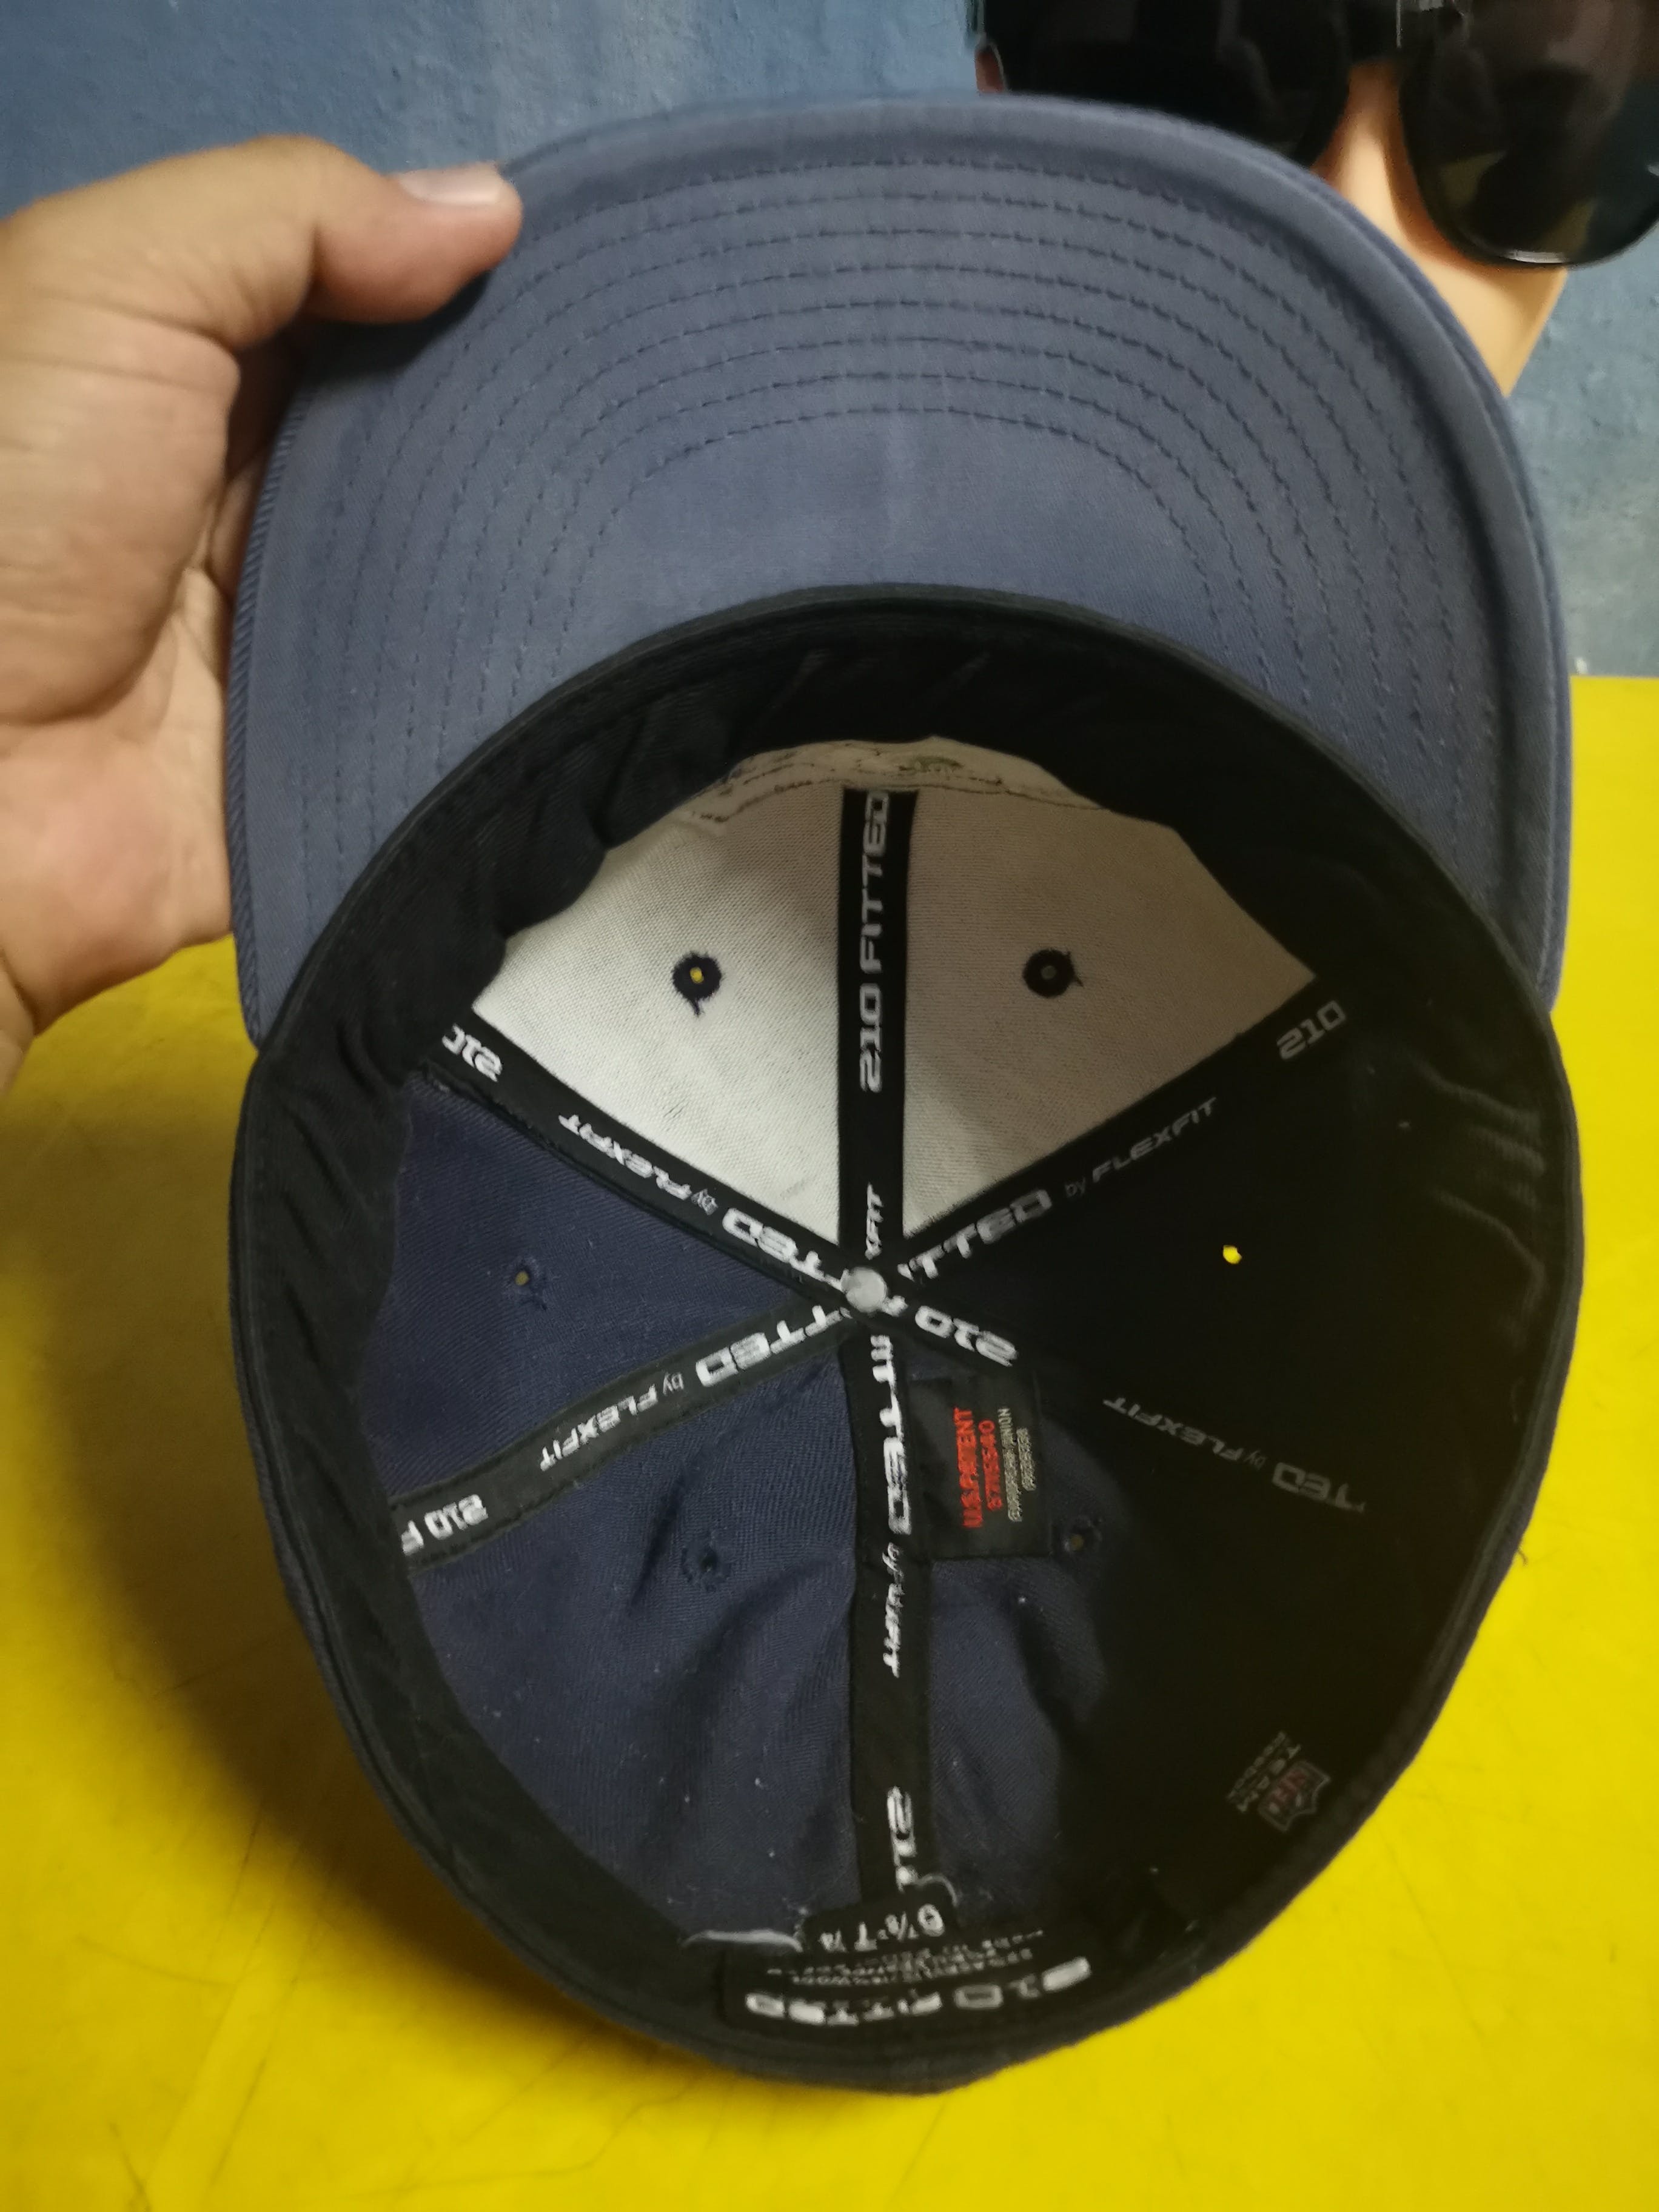 NFL Fullcap Embroidery By Team Apparel Reebok - 9